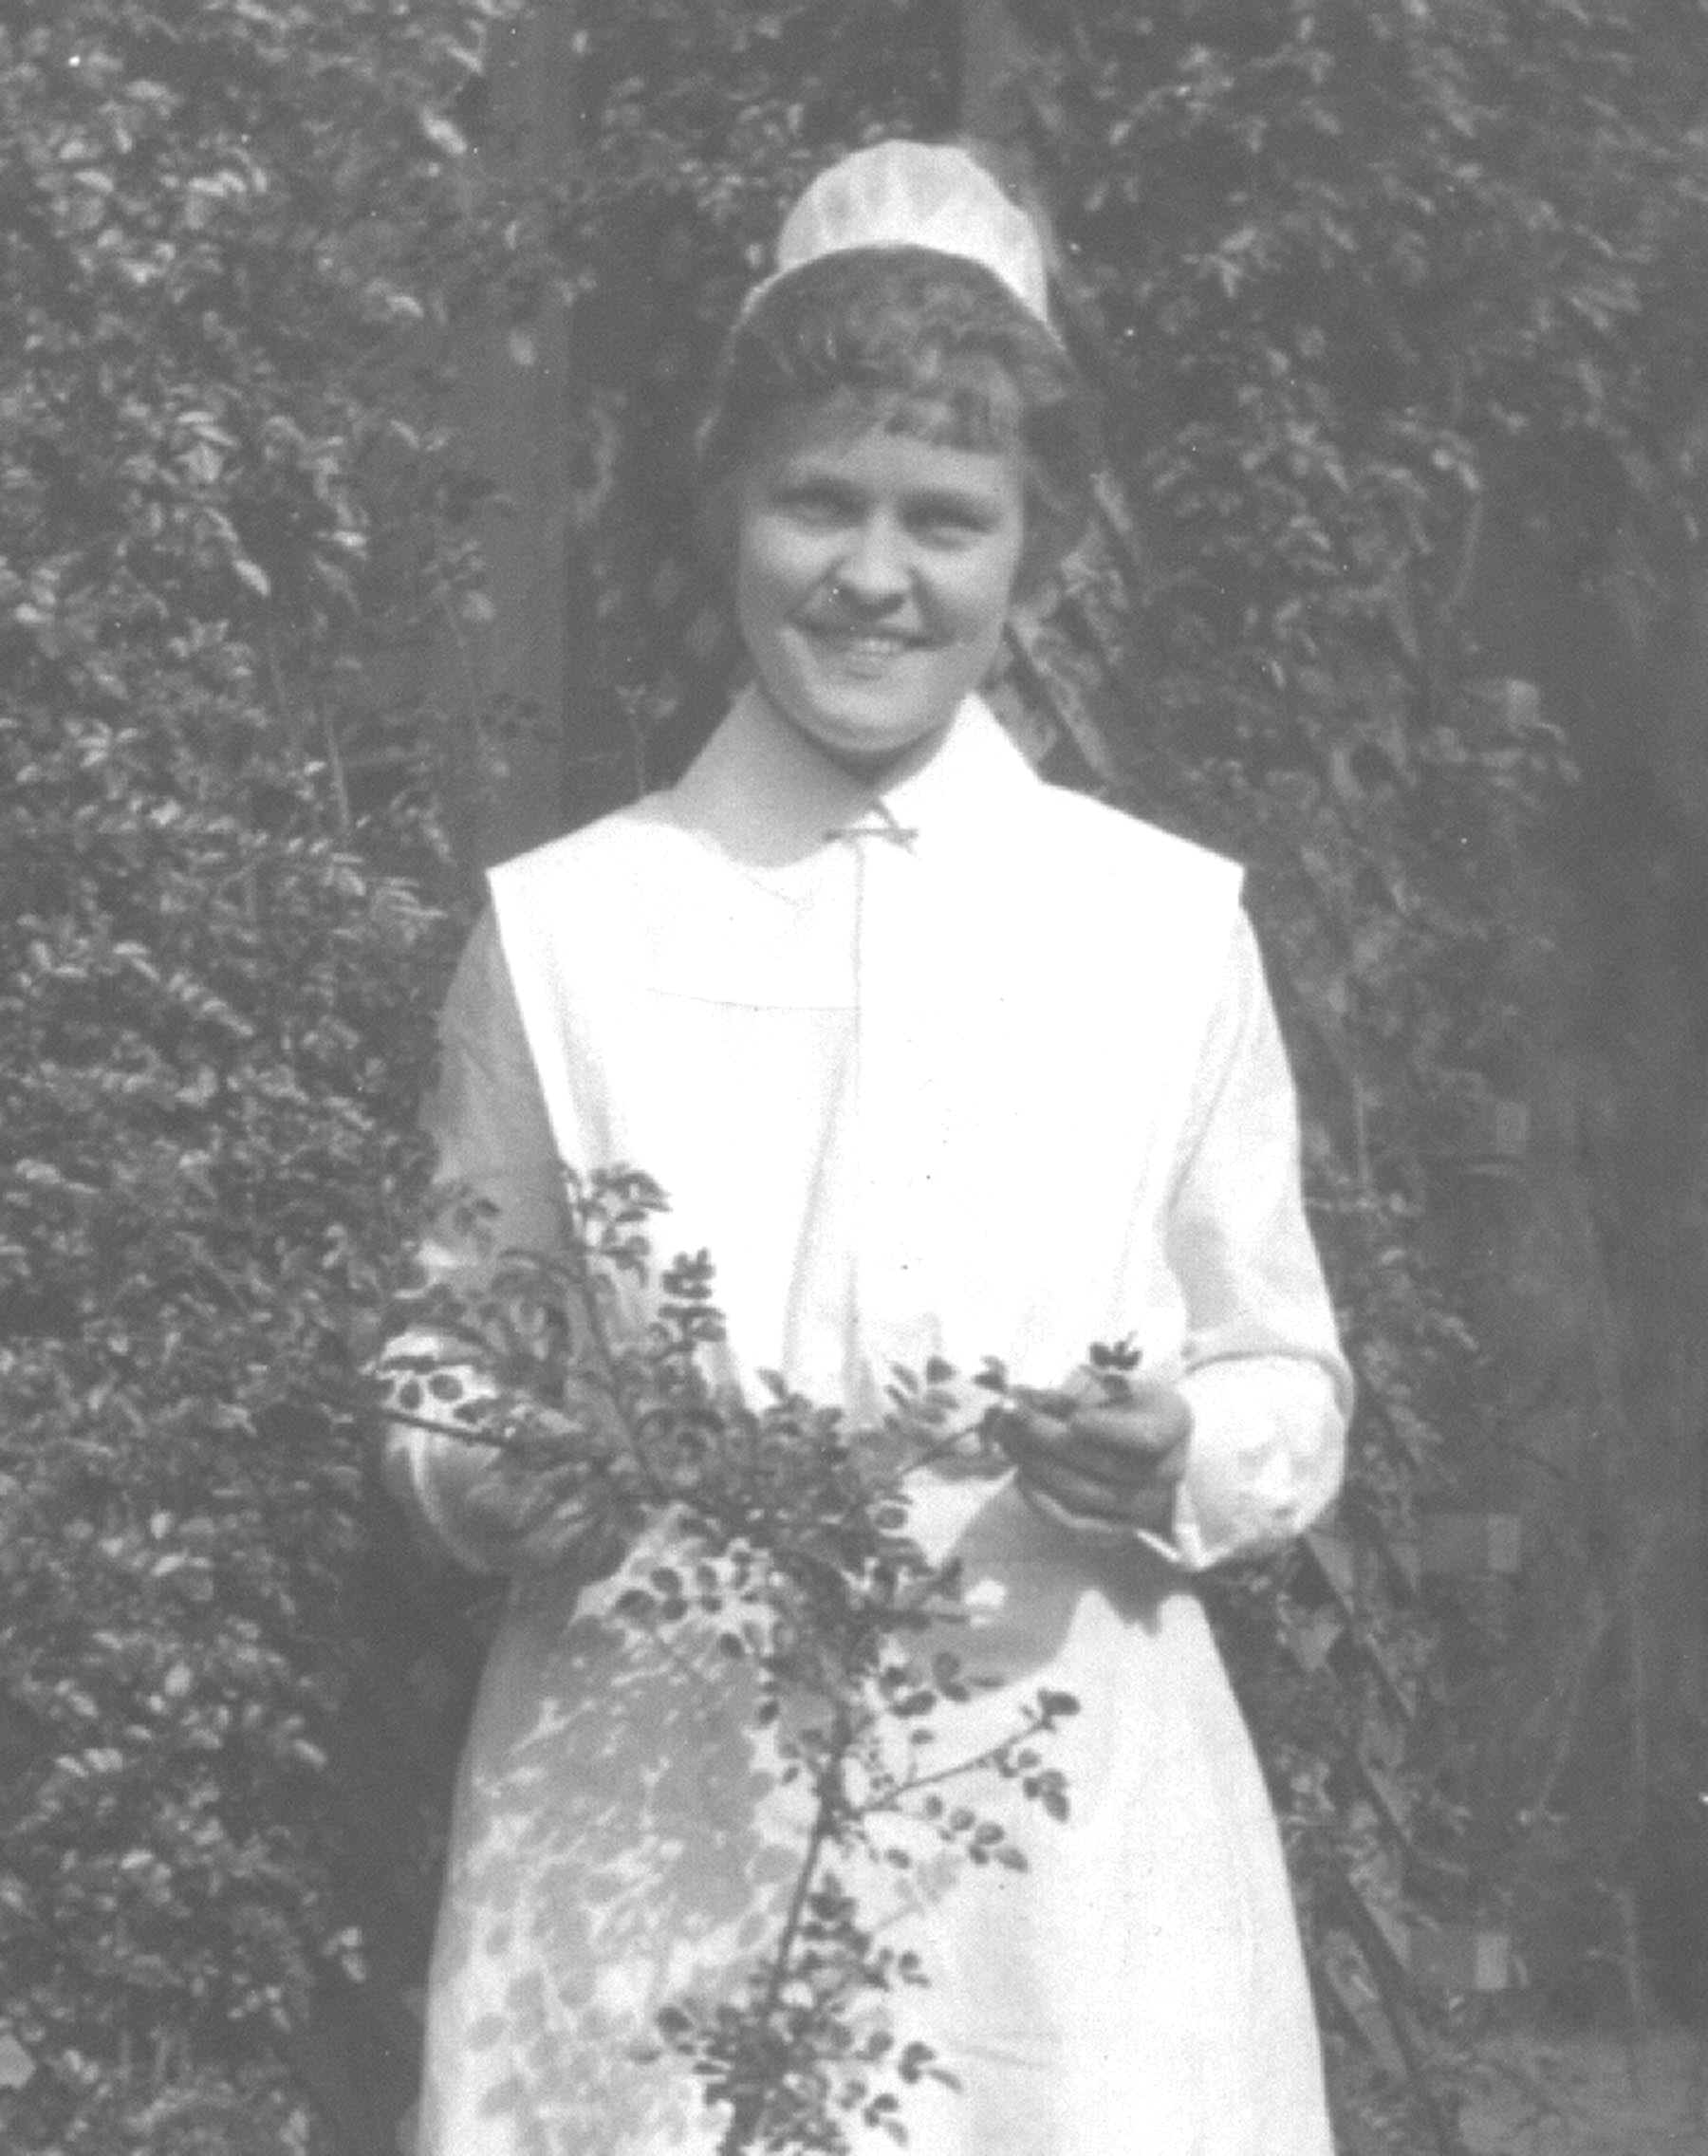 Mable as she graduated from Johns Hopkins